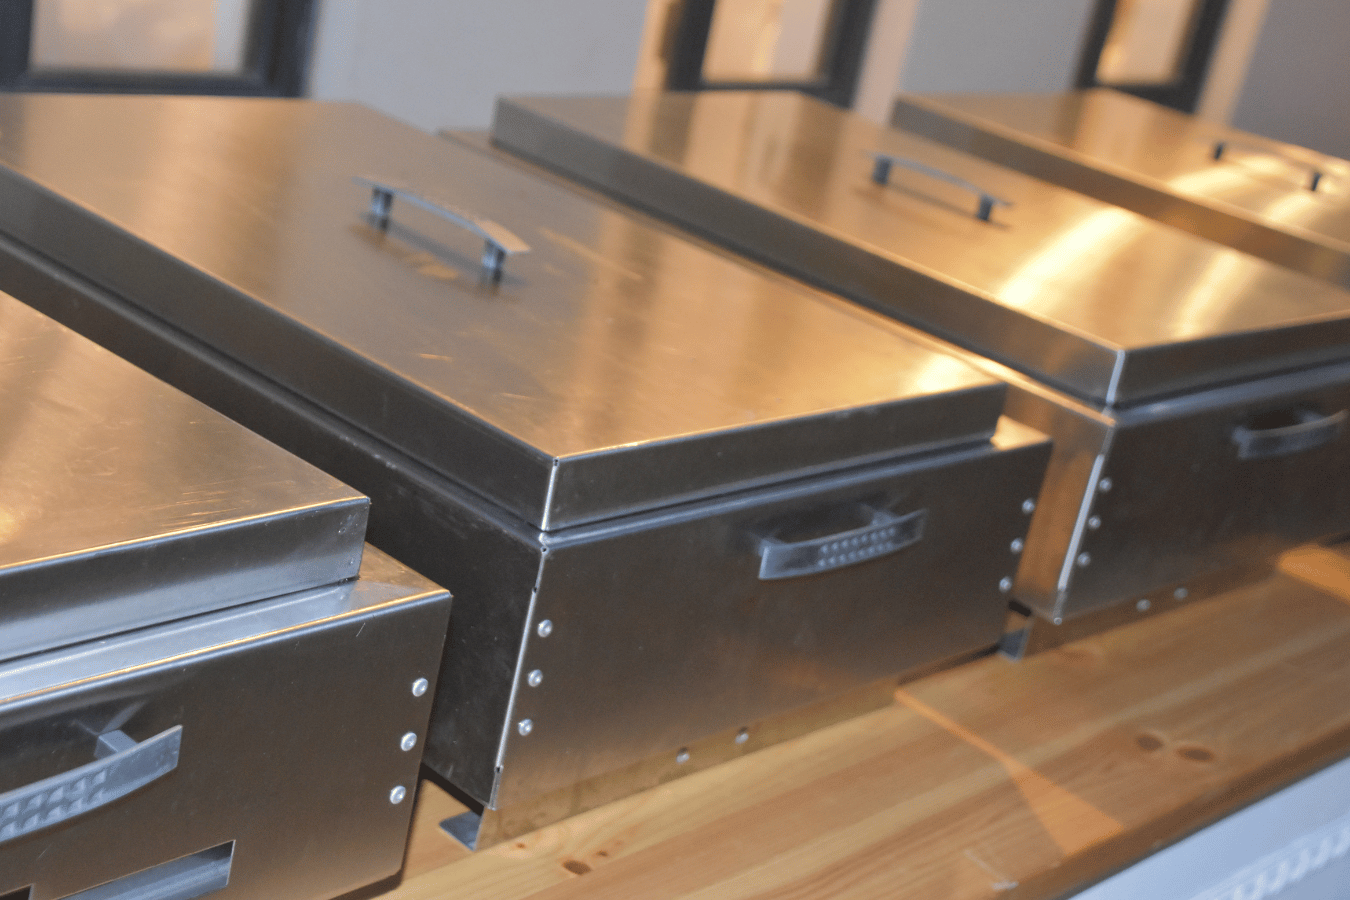 A row of stainless steel boxes with handles on a wooden table